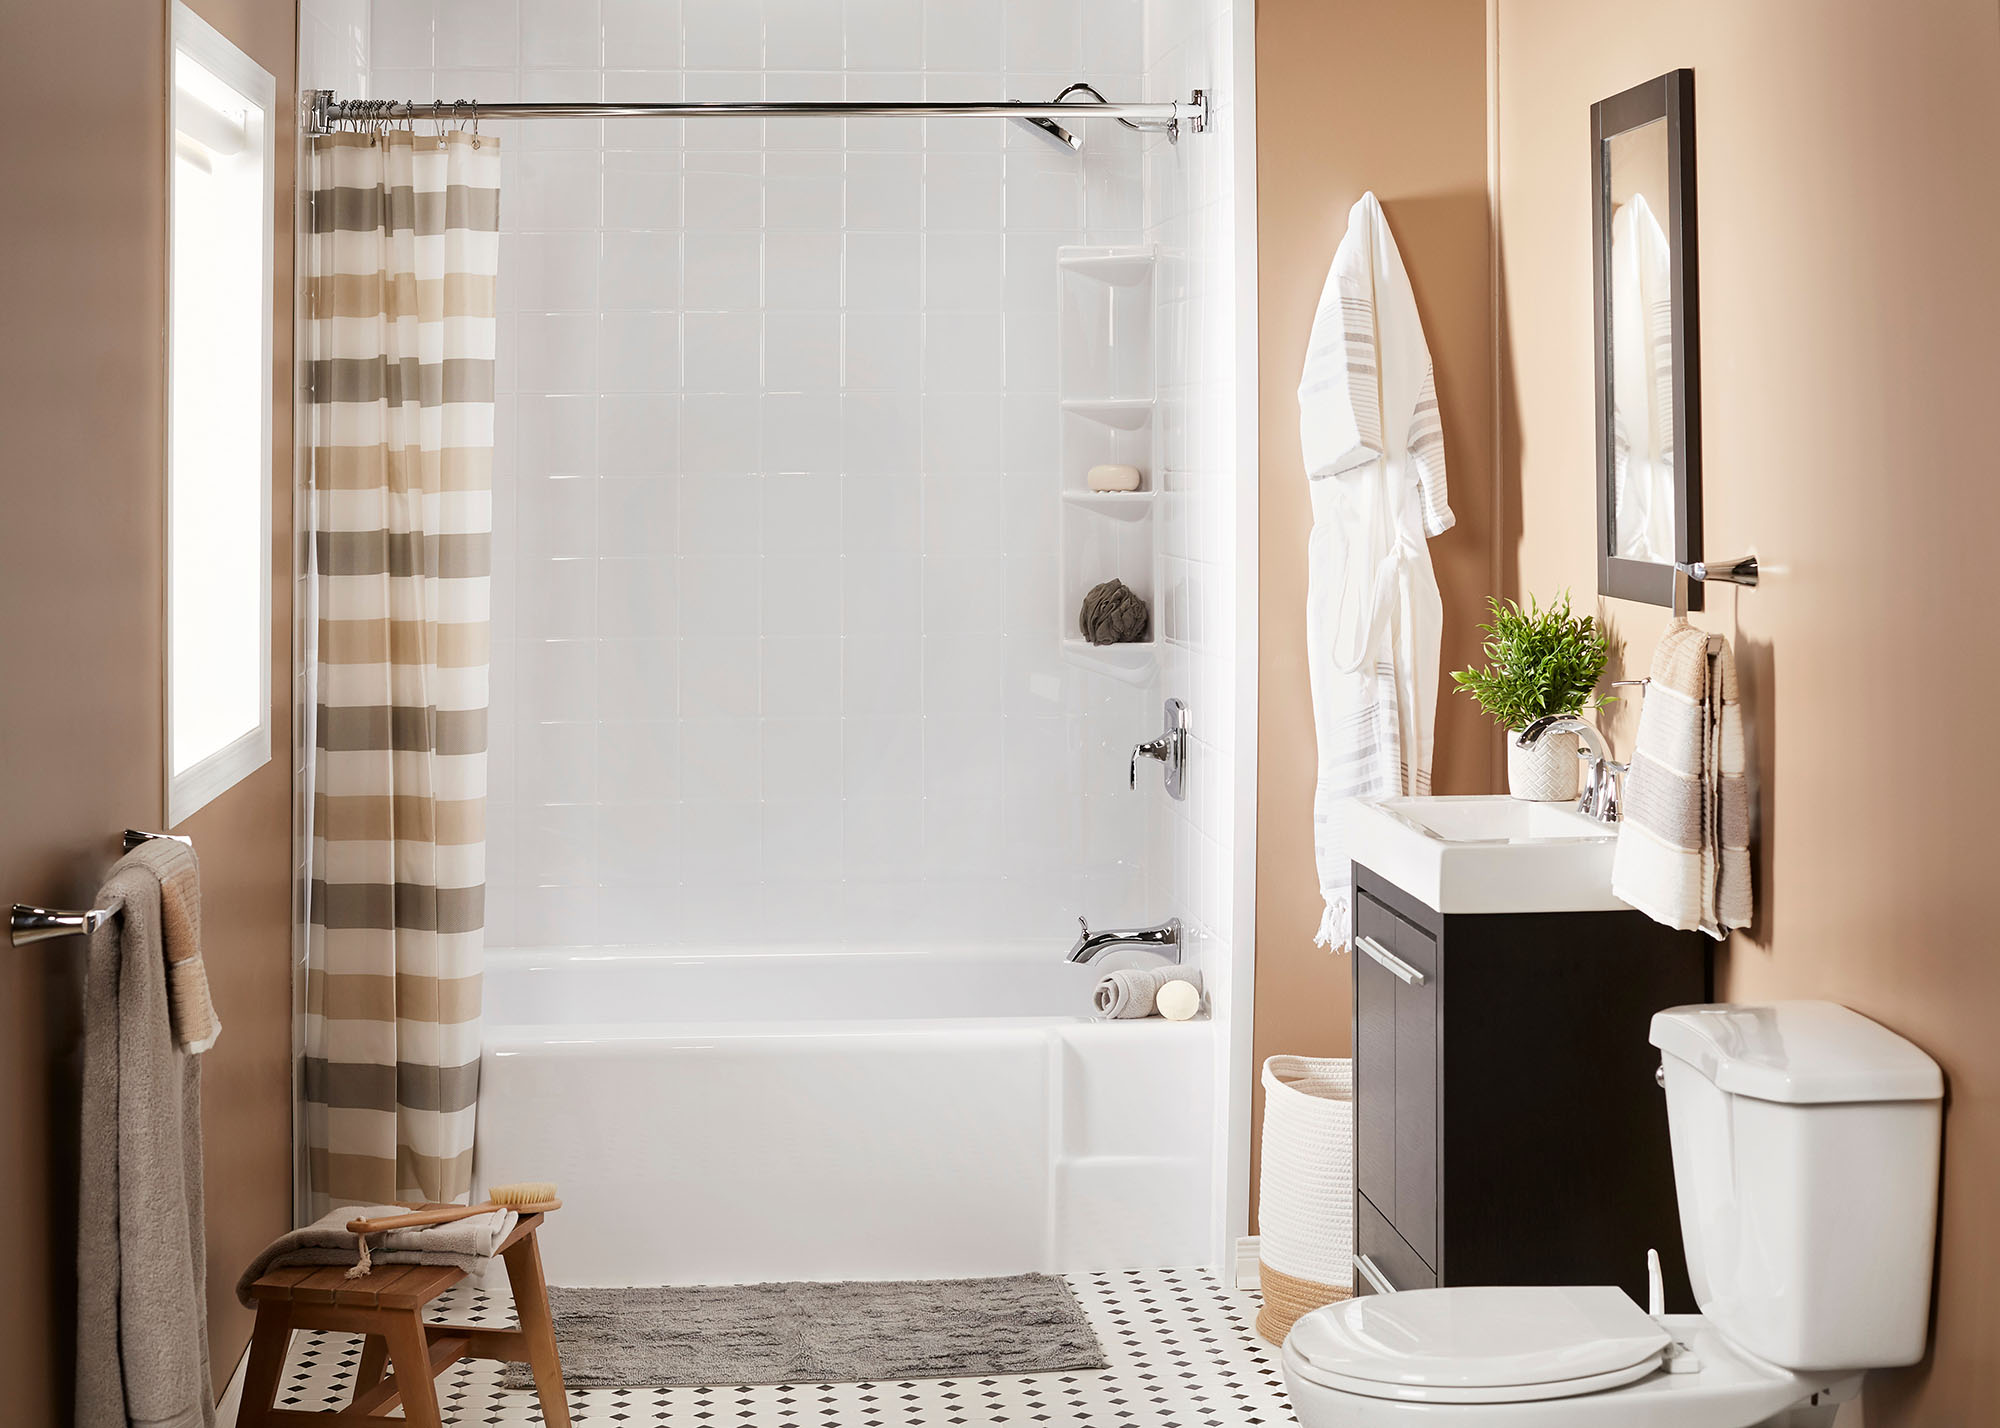 How to declutter and keep your bathroom organized - Bath Fitter